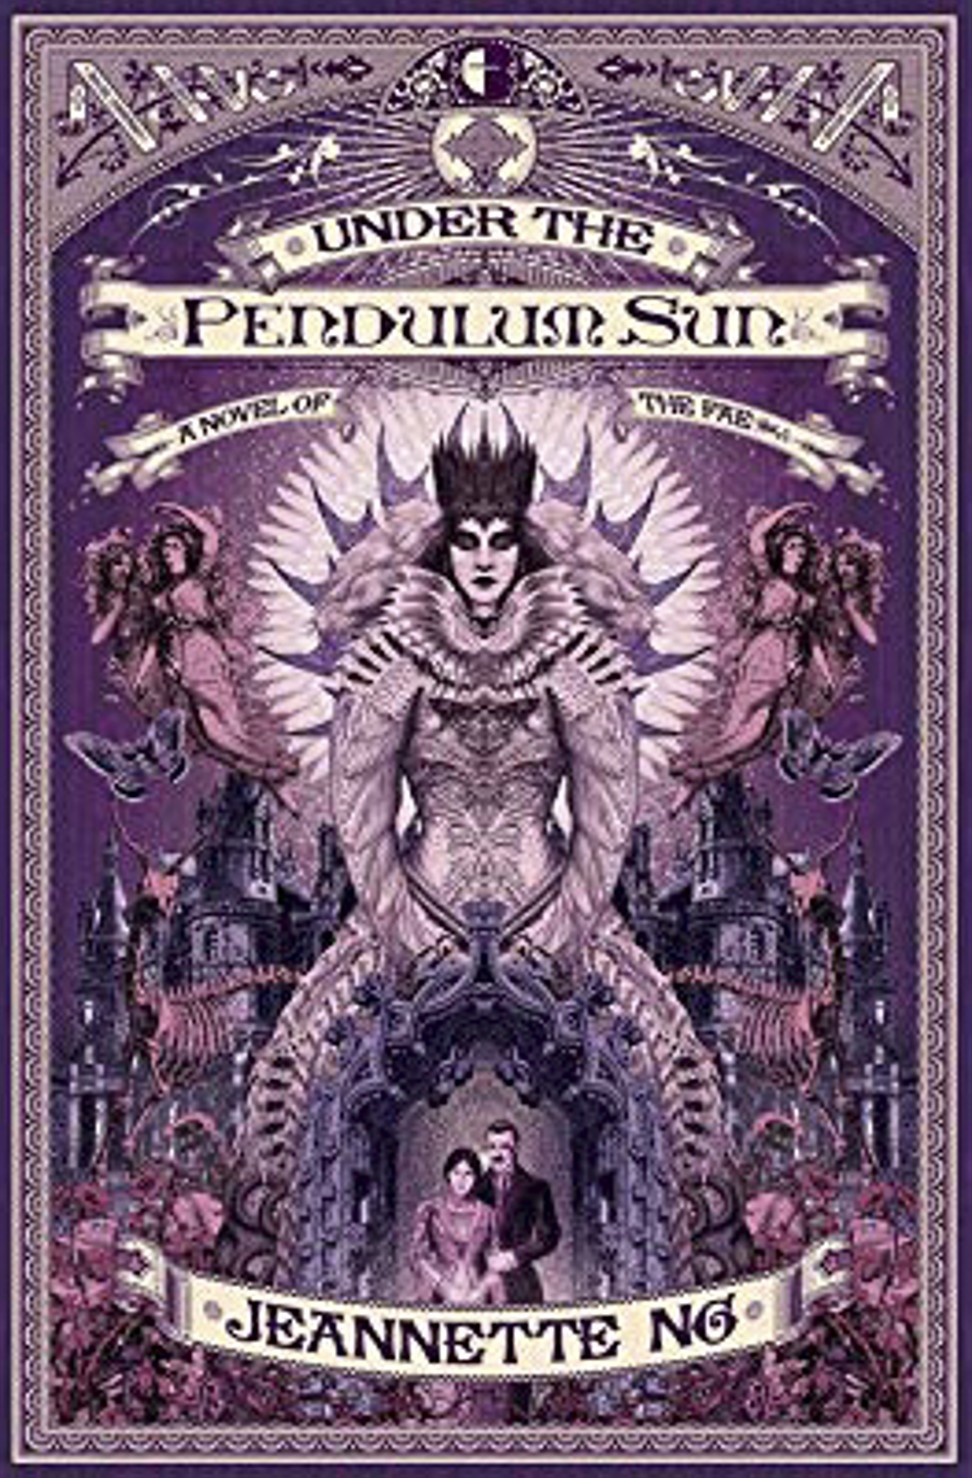 Under the Pendulum Sun by Jeannette Ng.